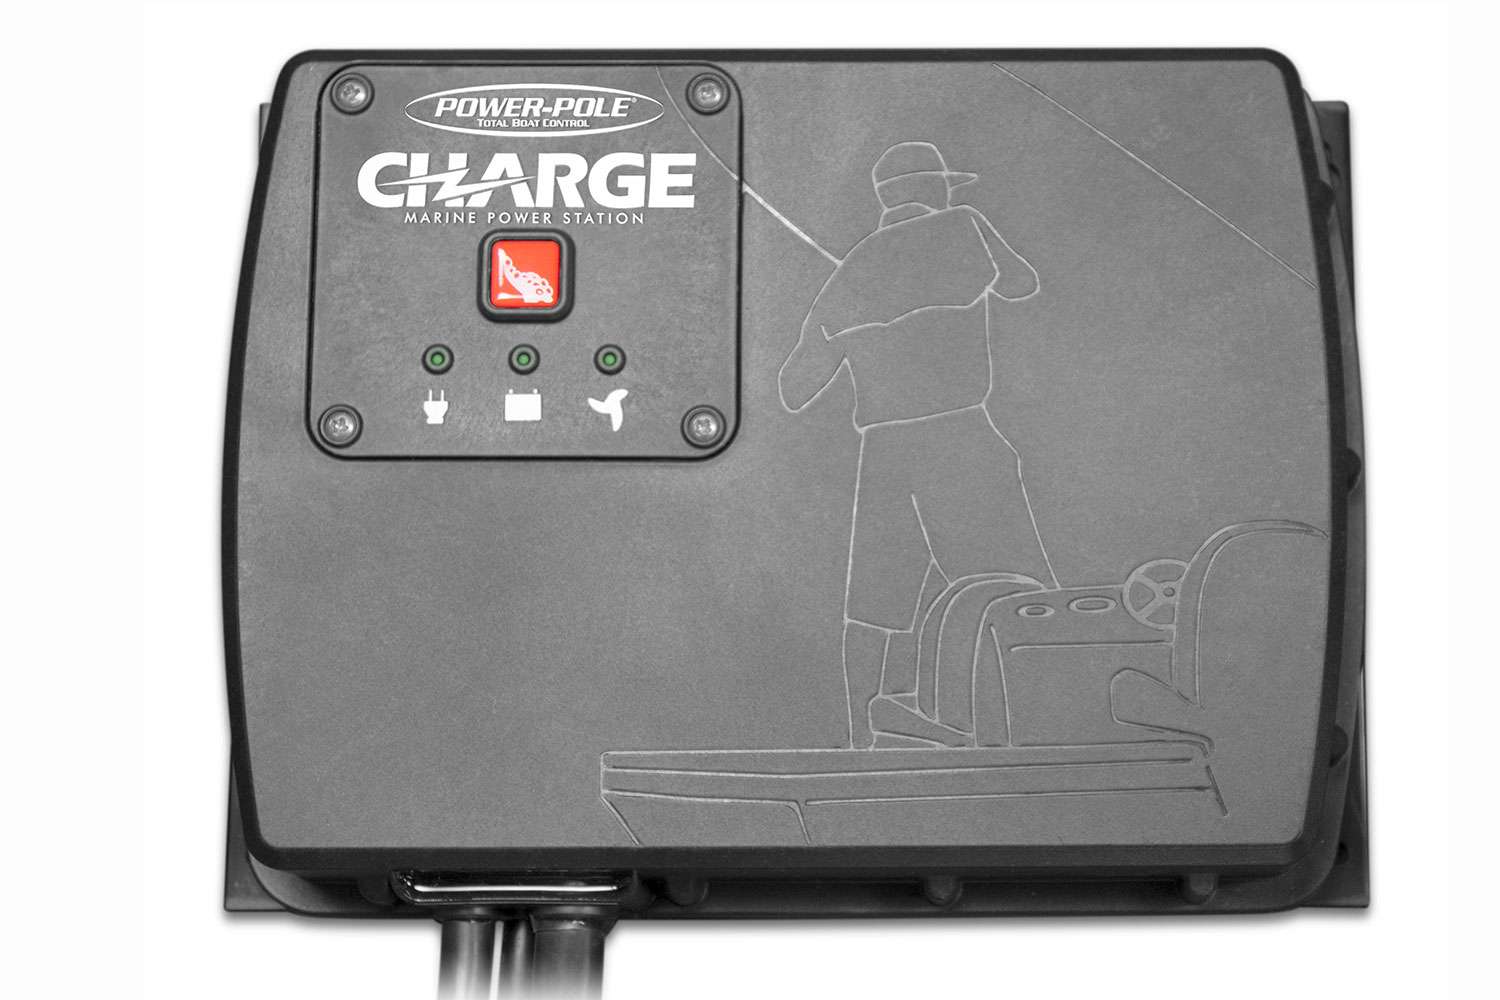 <p><b>Power-Pole Charge</b></p>
Give the gift of additional time on the water. The new Charge Marine Power Management Station is more than just a battery charger; itâs an intelligent power management system that performs the functions that previously needed three different devices to accomplish. Charge automatically monitors your power usage and battery levels to ensure you have the right amount of energy for every accessory on your boat, giving you more time to enjoy on the water. <br>
<p><b>MSRP: $1,299</b></p>
<a href=